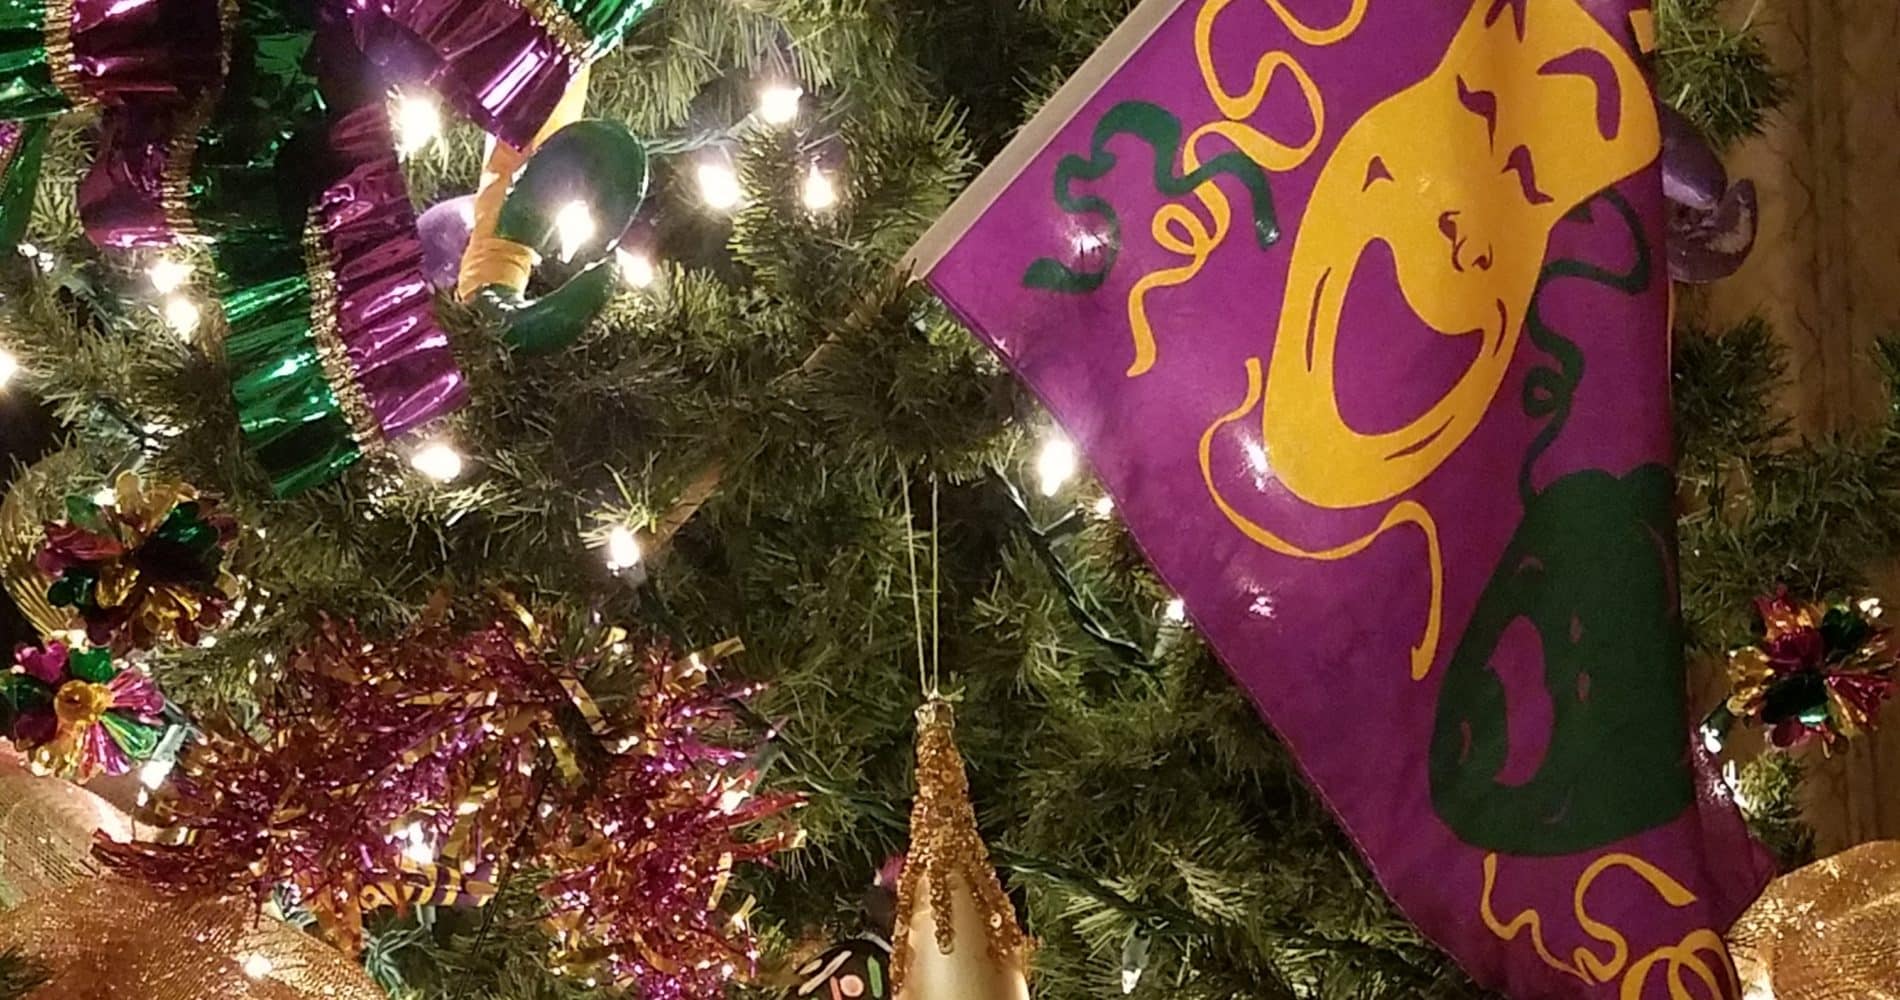 Mardi Gras decorations on tree with white lights